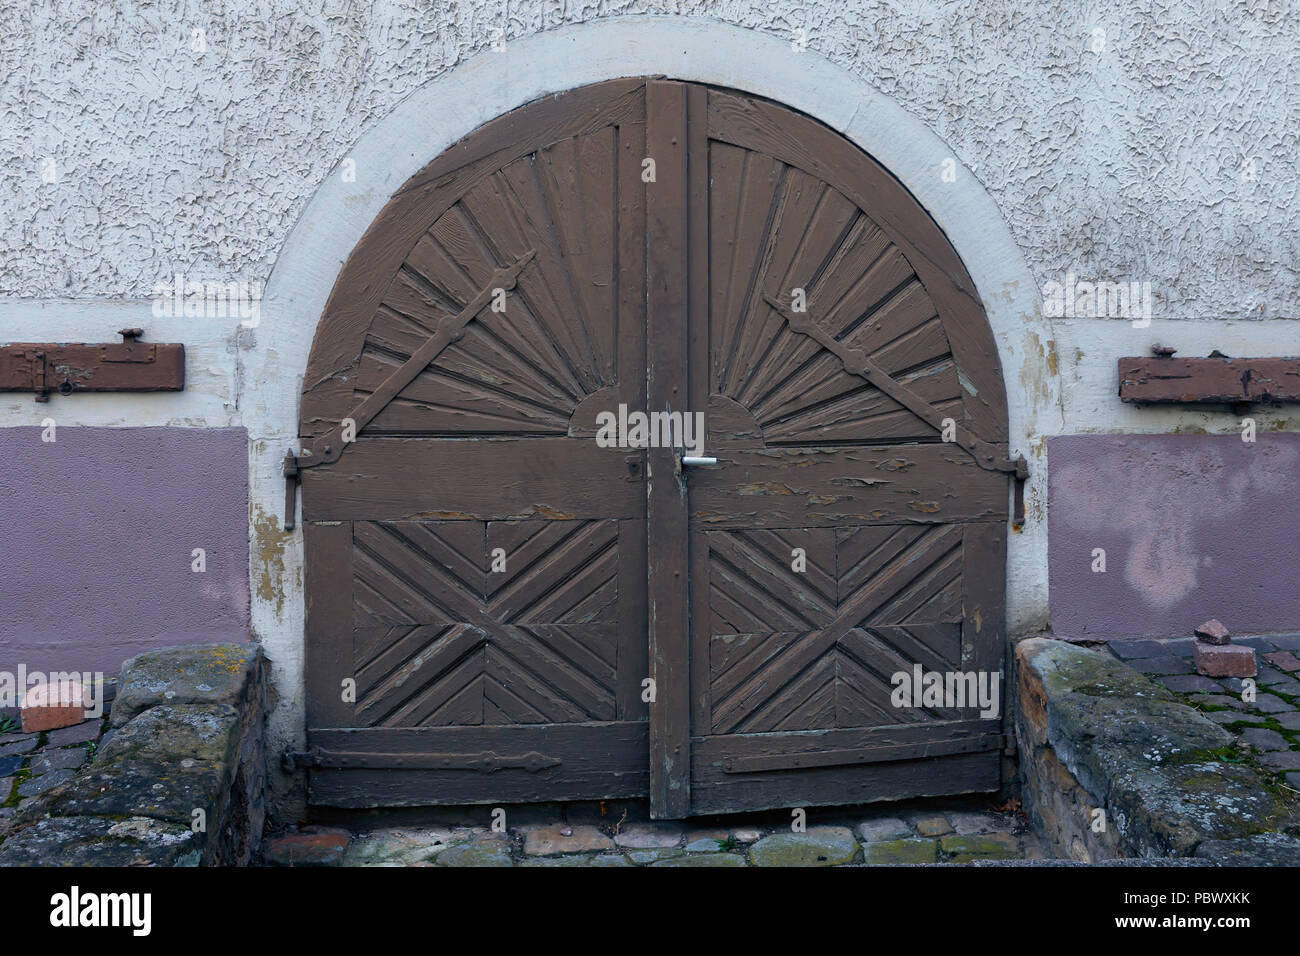 The old wooden doors, decorated with metal ornaments, are typical for the historical part of small German cities. Old wooden door close-up Stock Photo